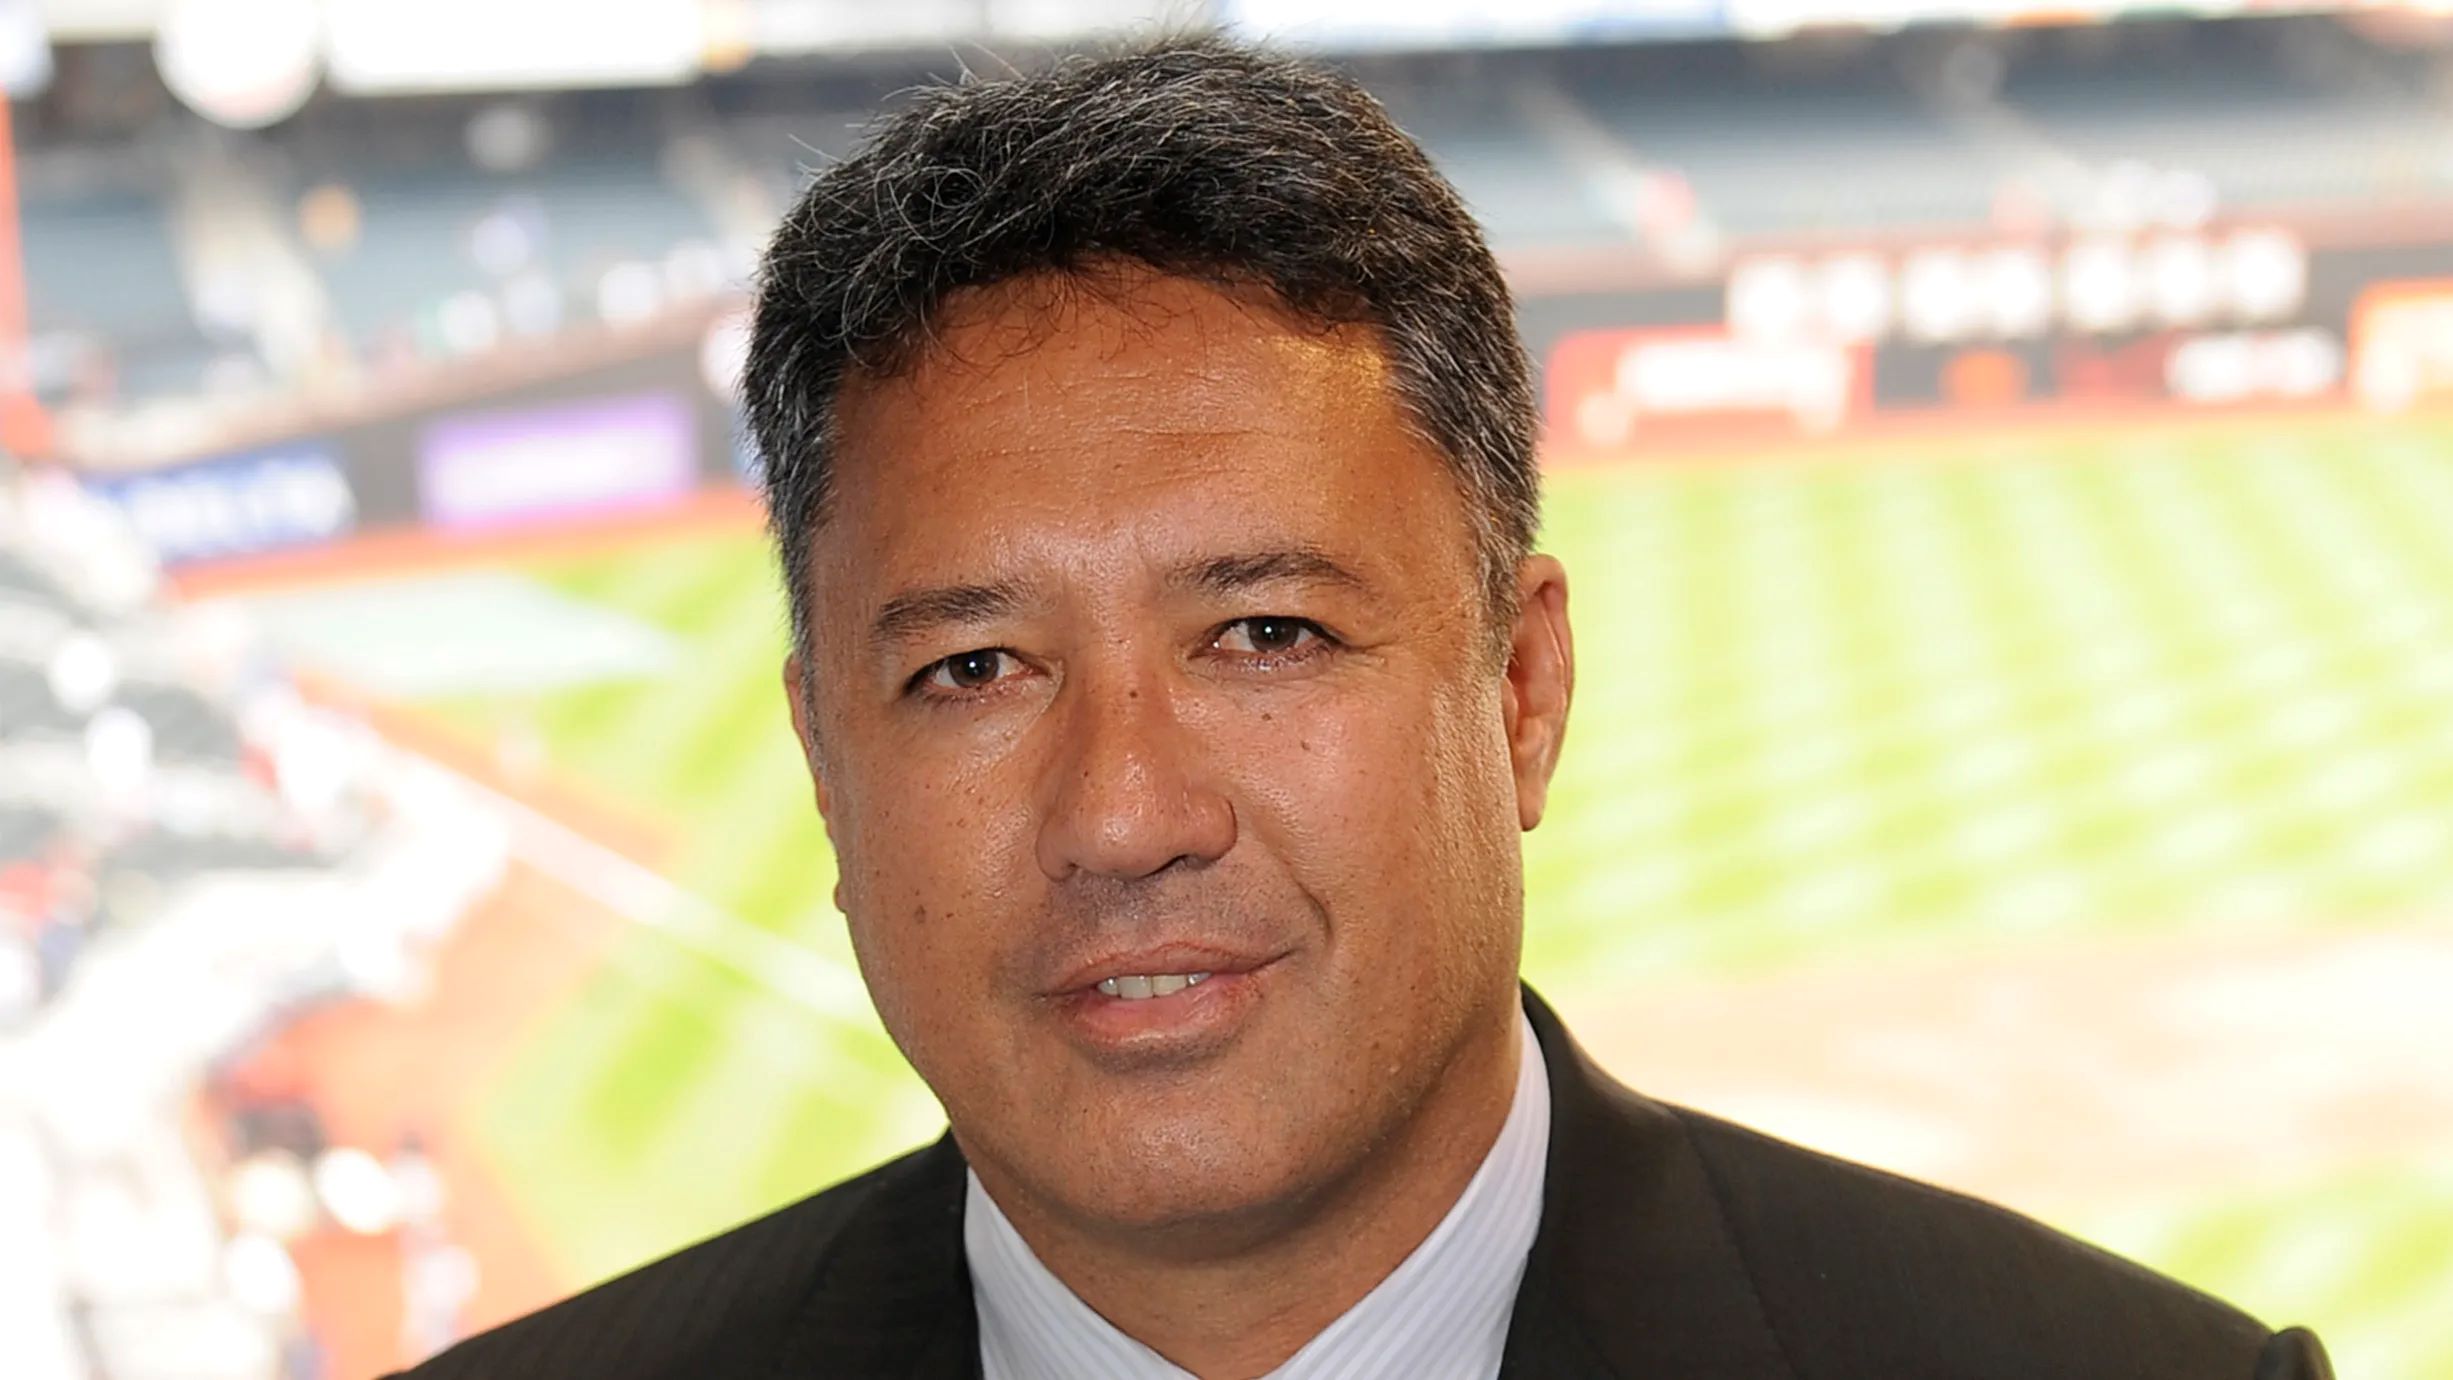 23-captivating-facts-about-ron-darling